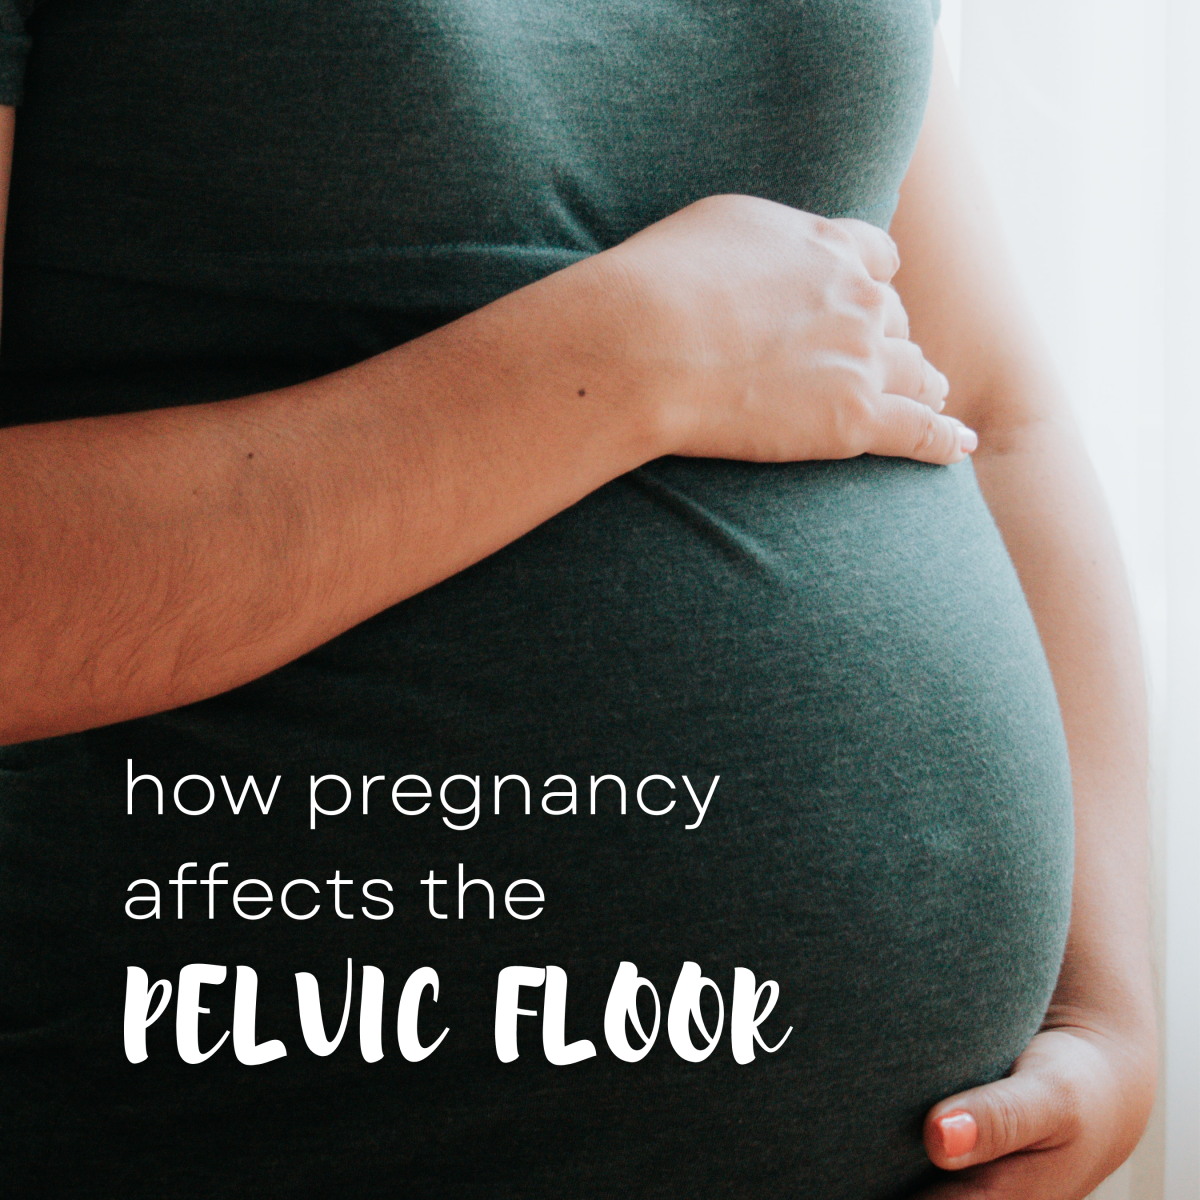 How Pregnancy Affects the Pelvic Floor and What to Do Postpartum